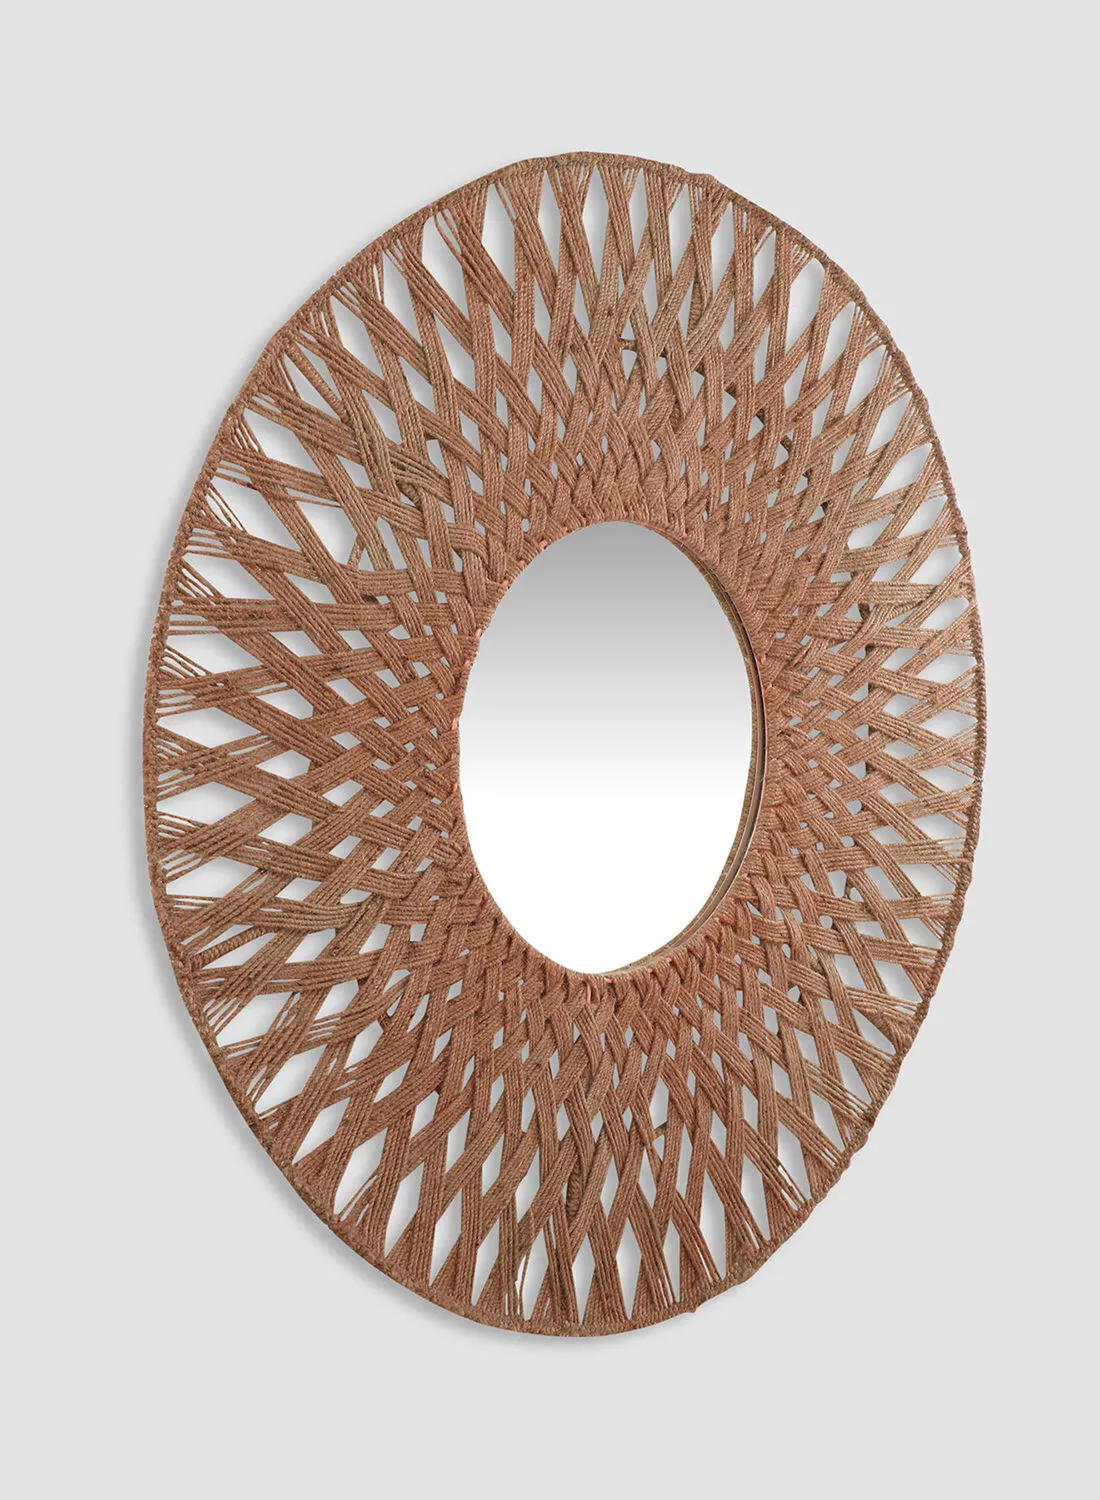 Switch Modern Design Wall Mirror Unique Luxury Quality Material For The Perfect Stylish Home SAS20B Natural Dia 107centimeter